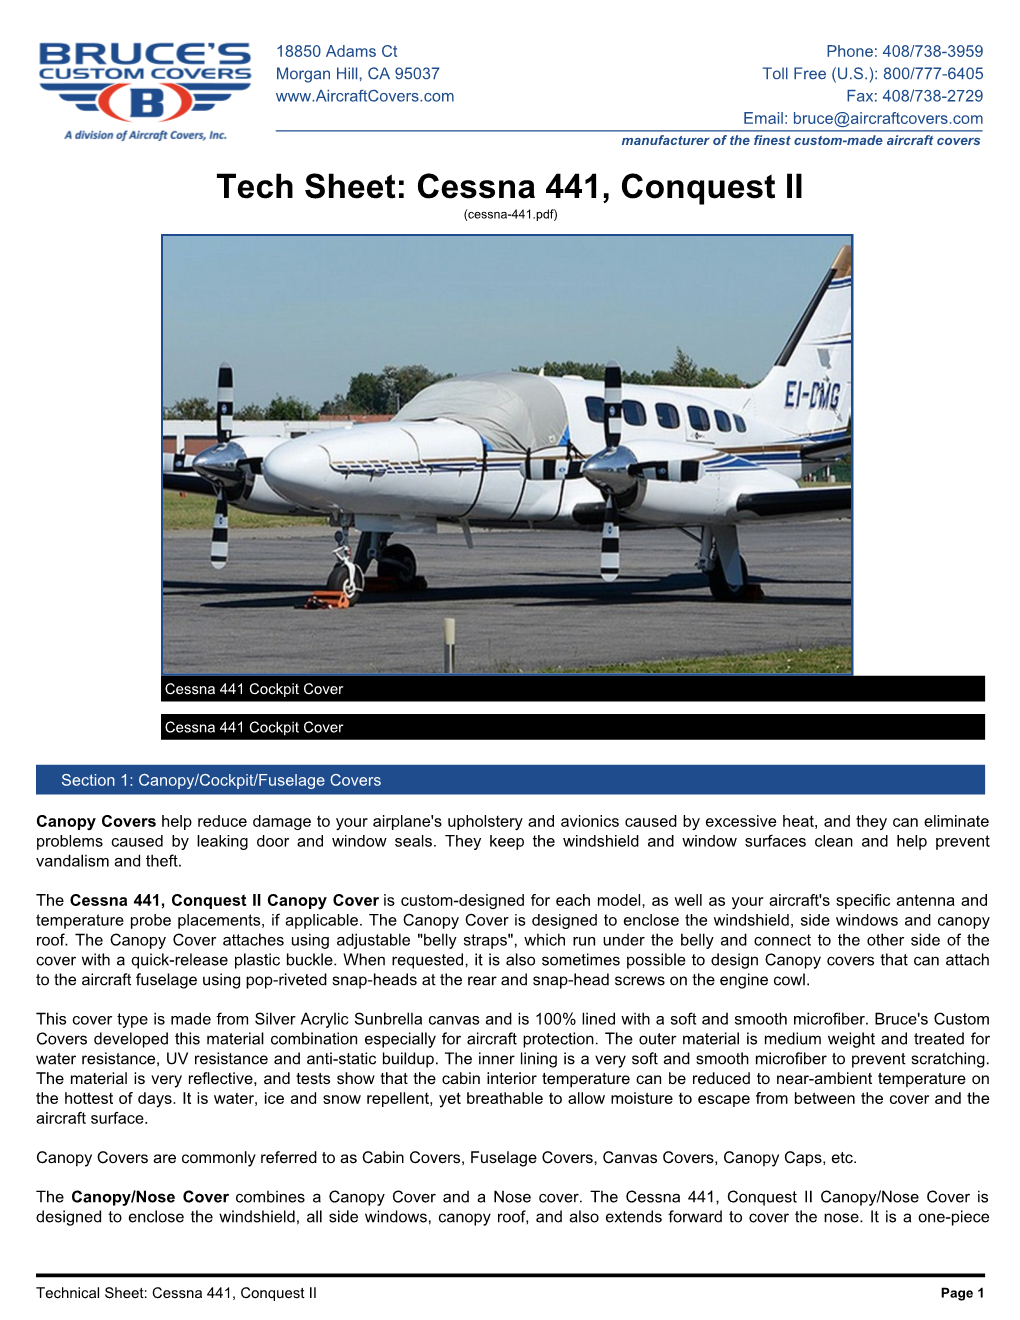 Cessna 441, Conquest II: Covers, Plugs, Sun Shades & More